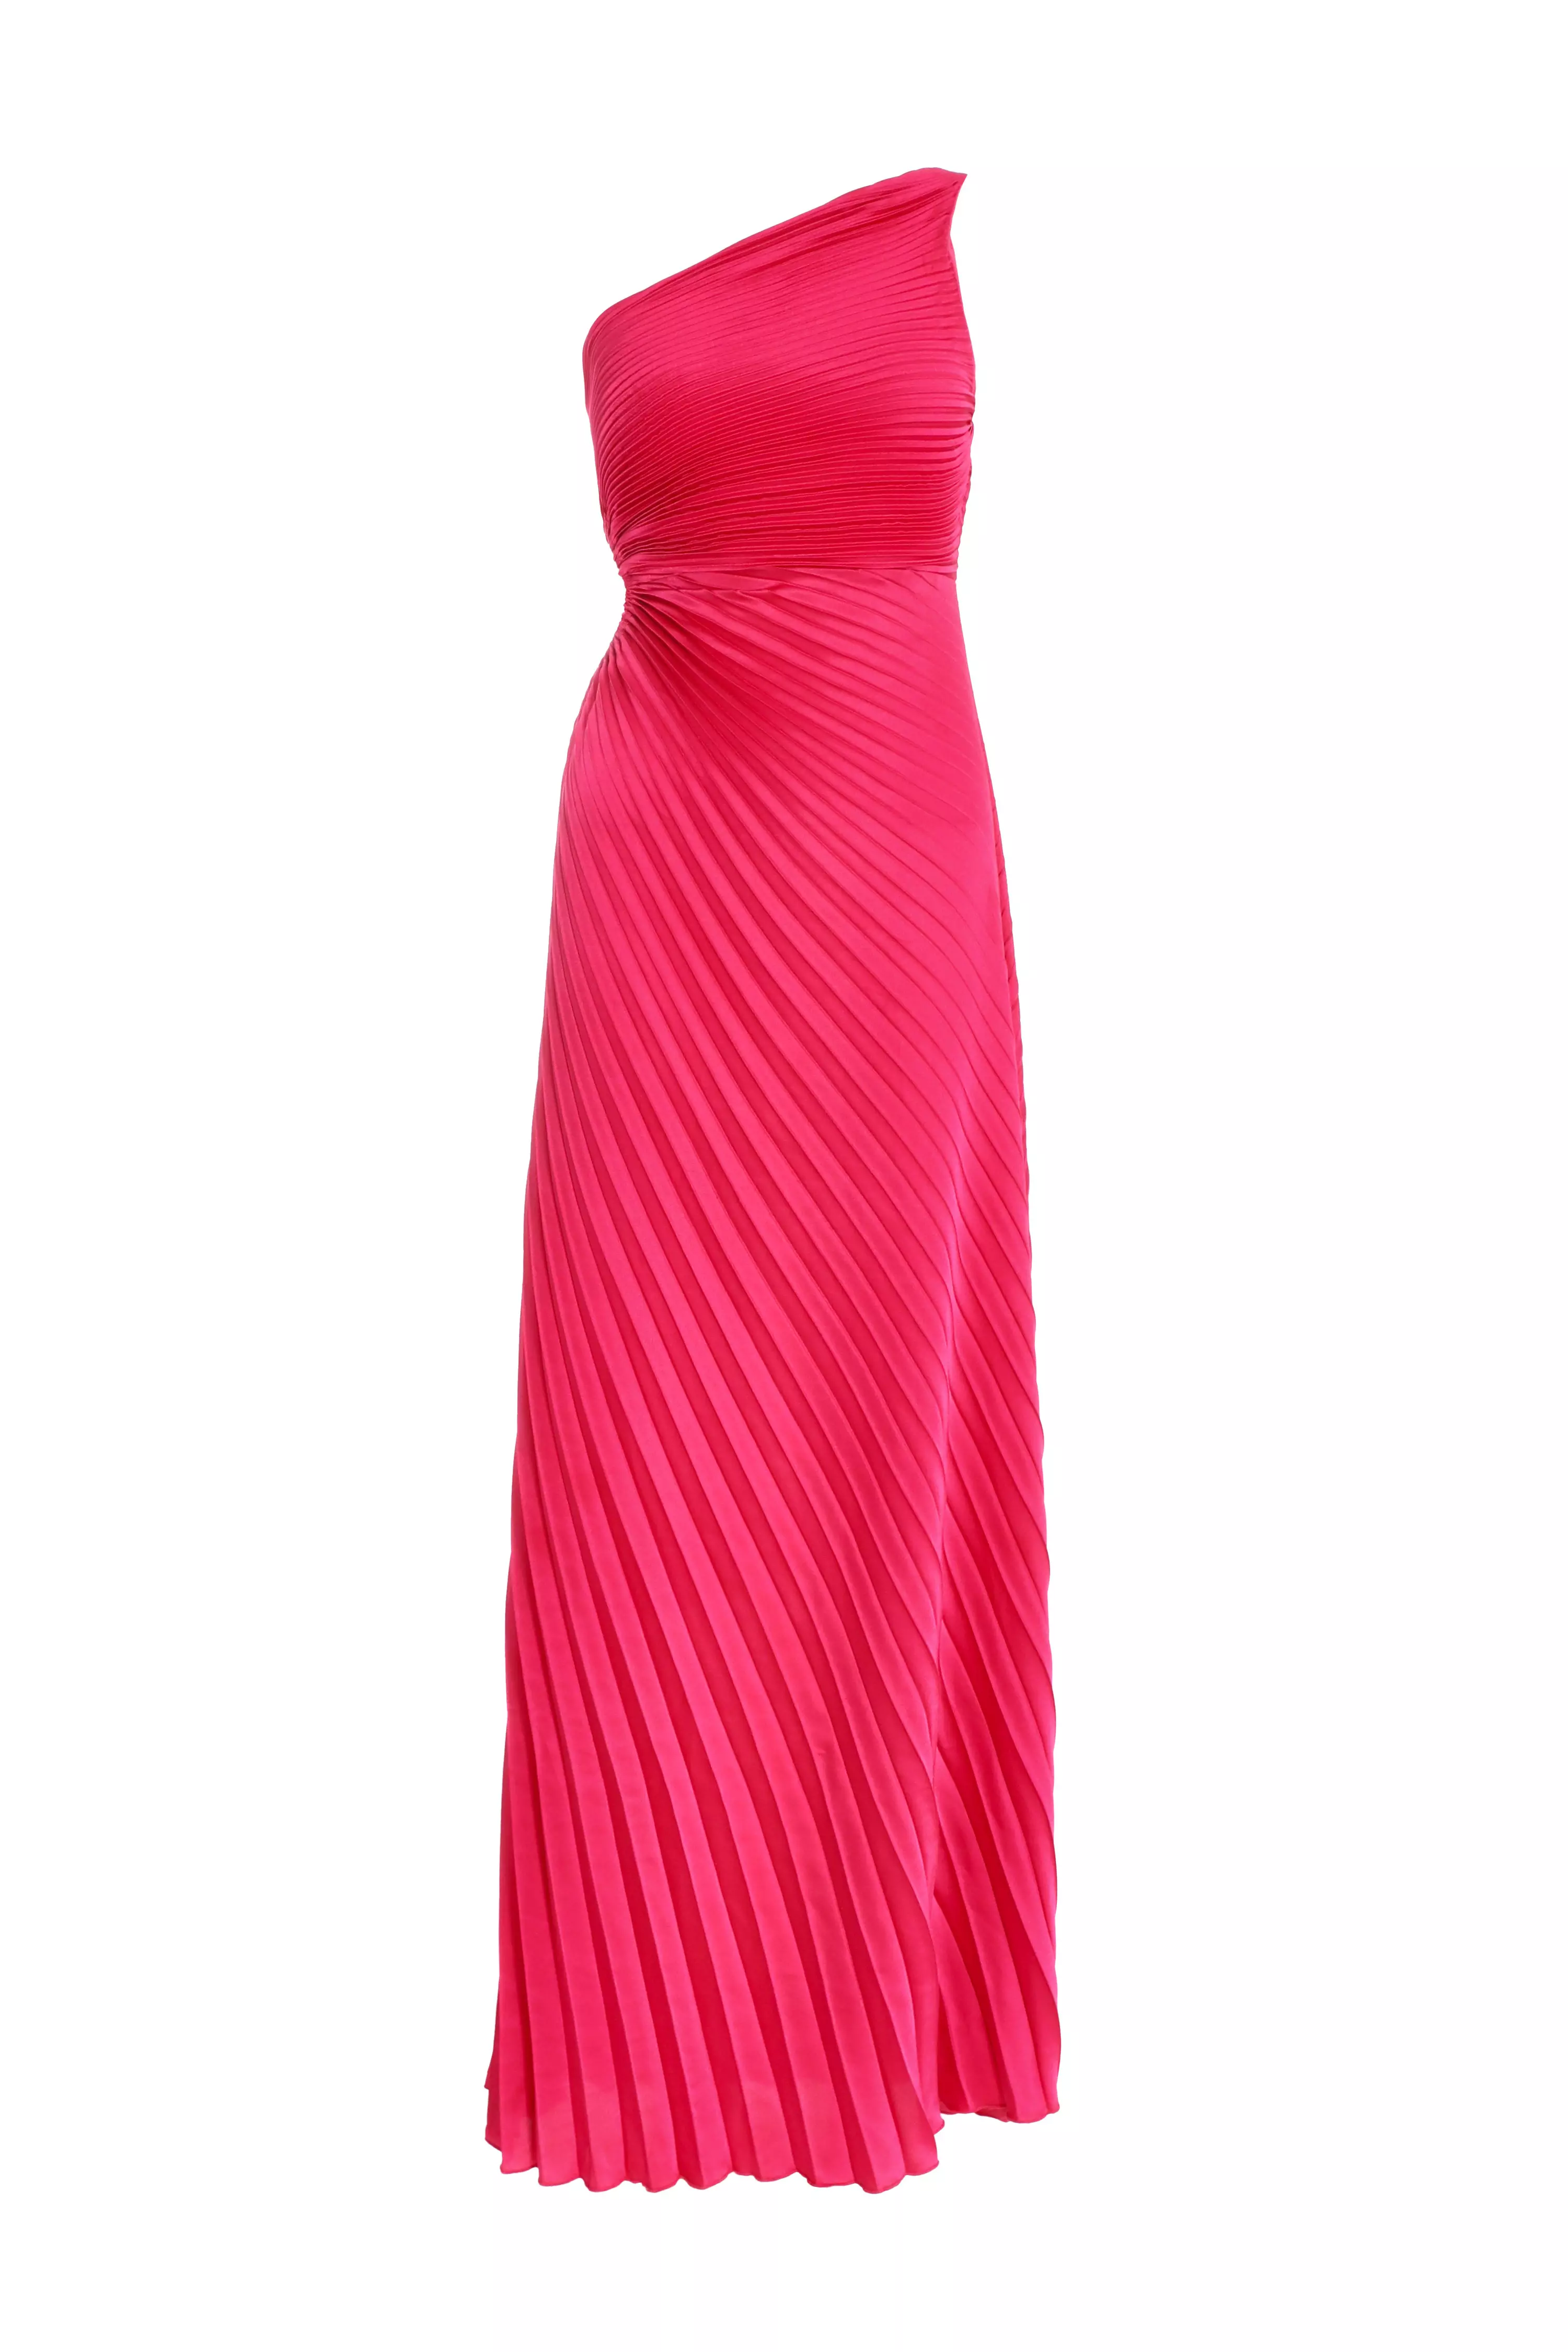 Pink Satin Pleated One Shoulder Maxi Dress